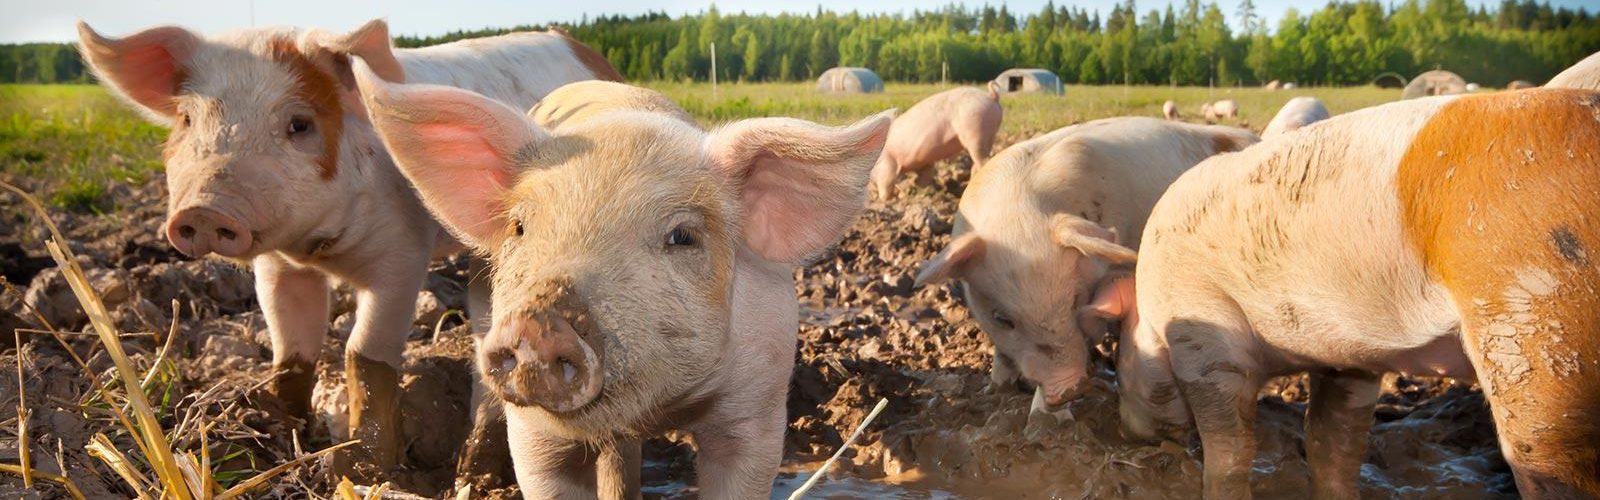 Solutions for Pig farming